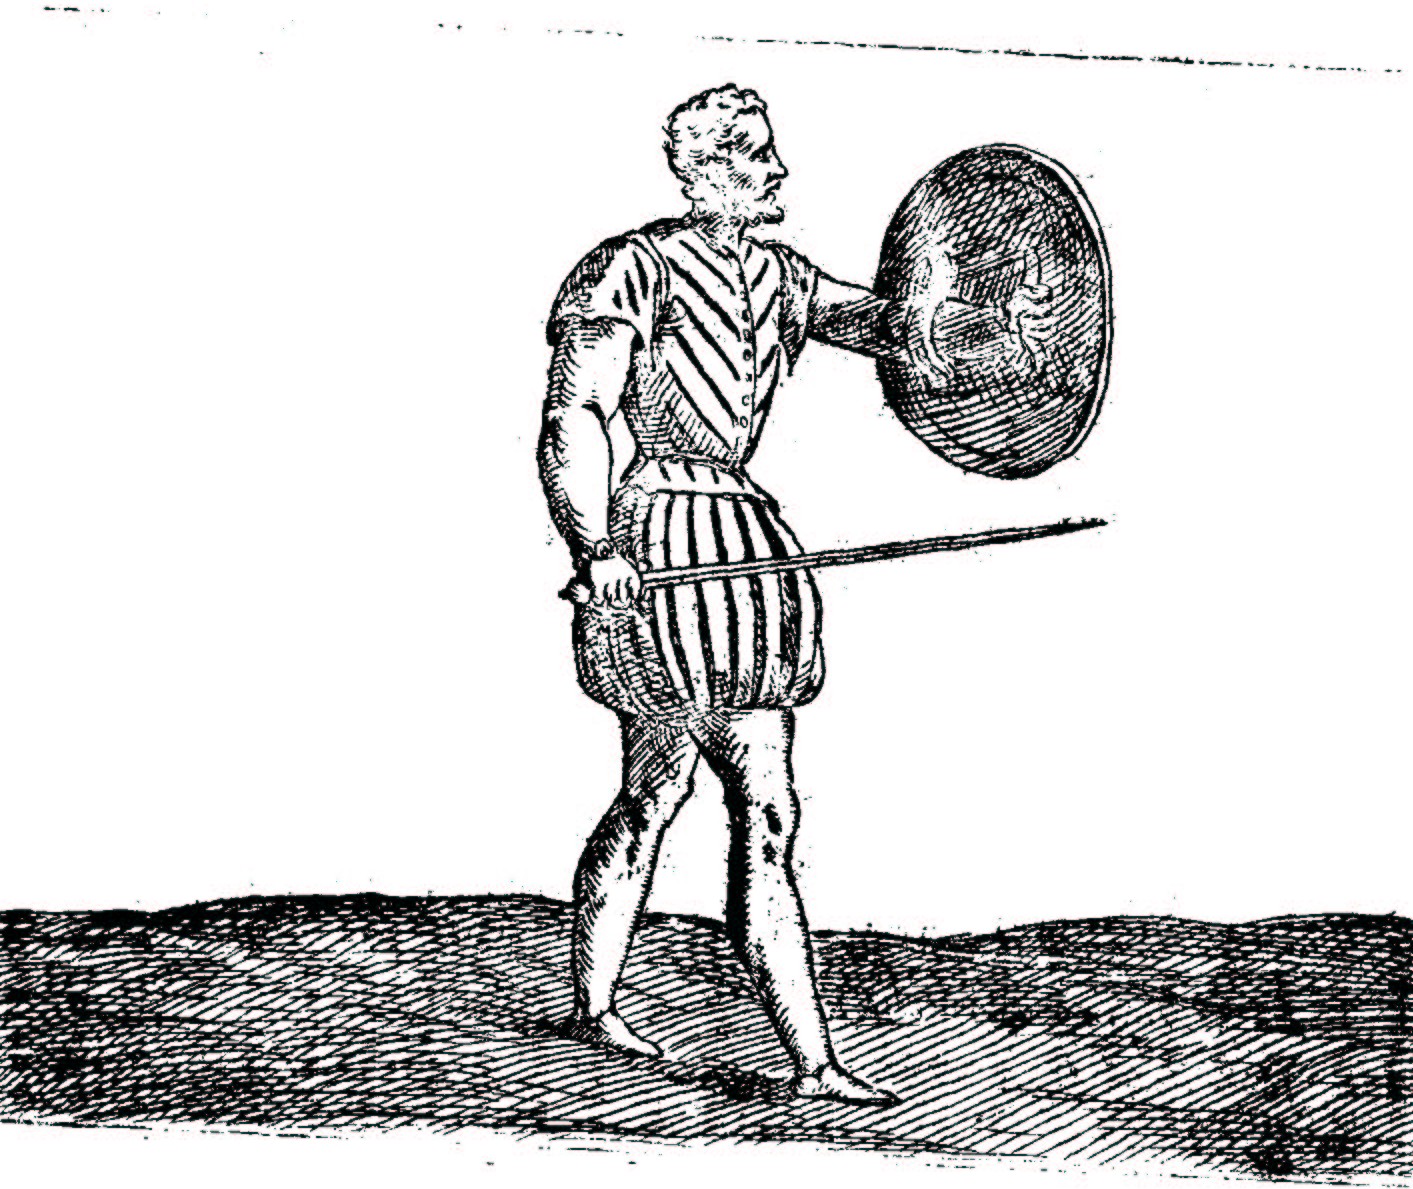 Duellist with rapier and round target.